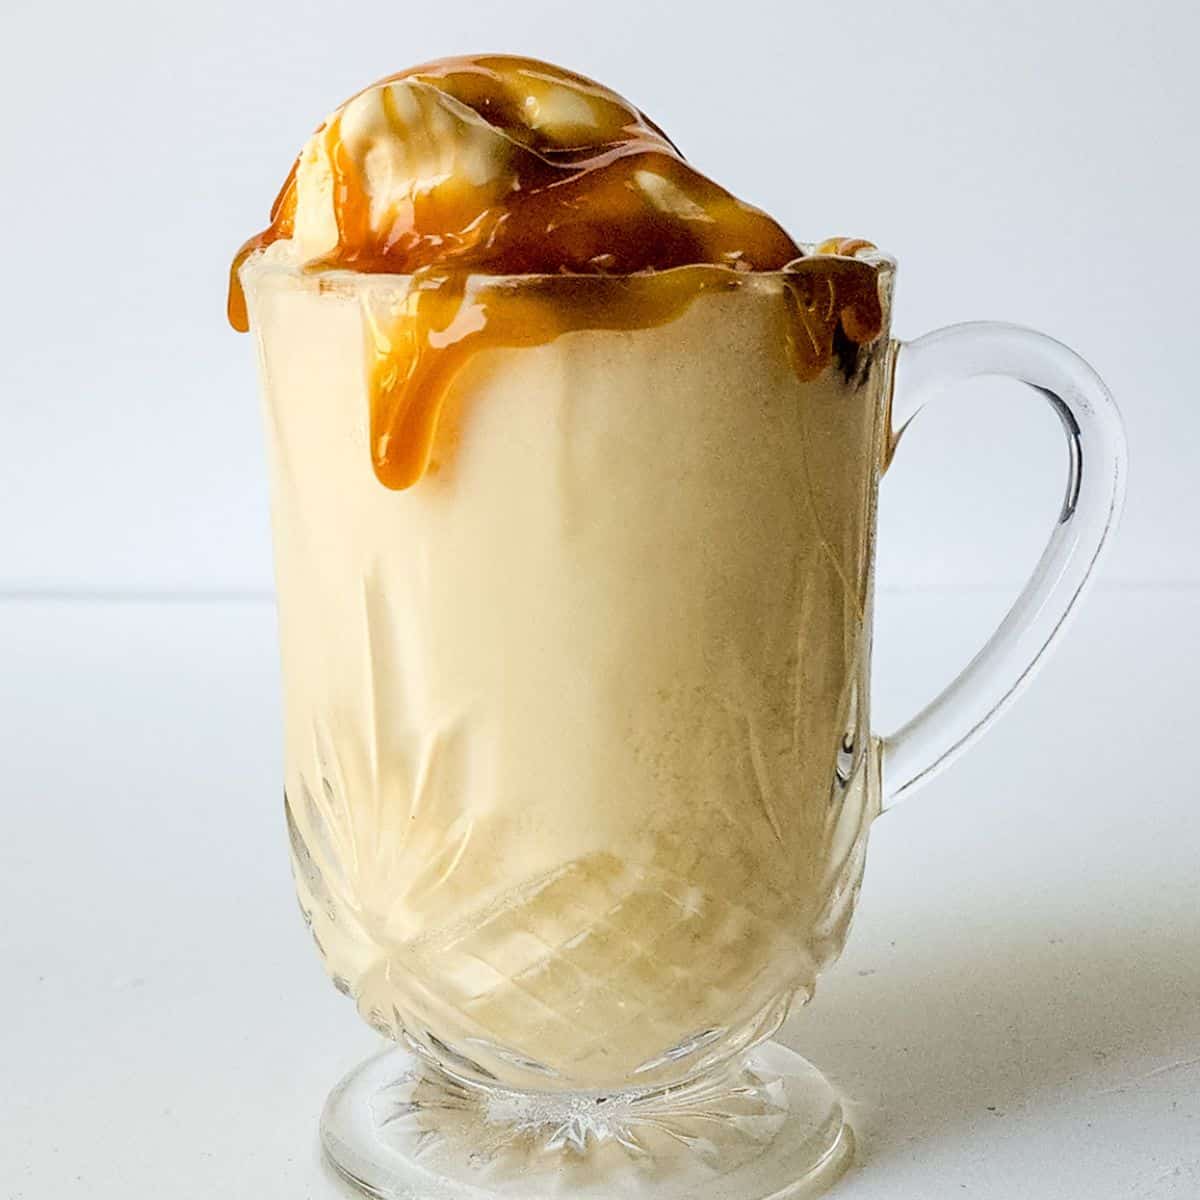 ice cream in a mug with caramel on top